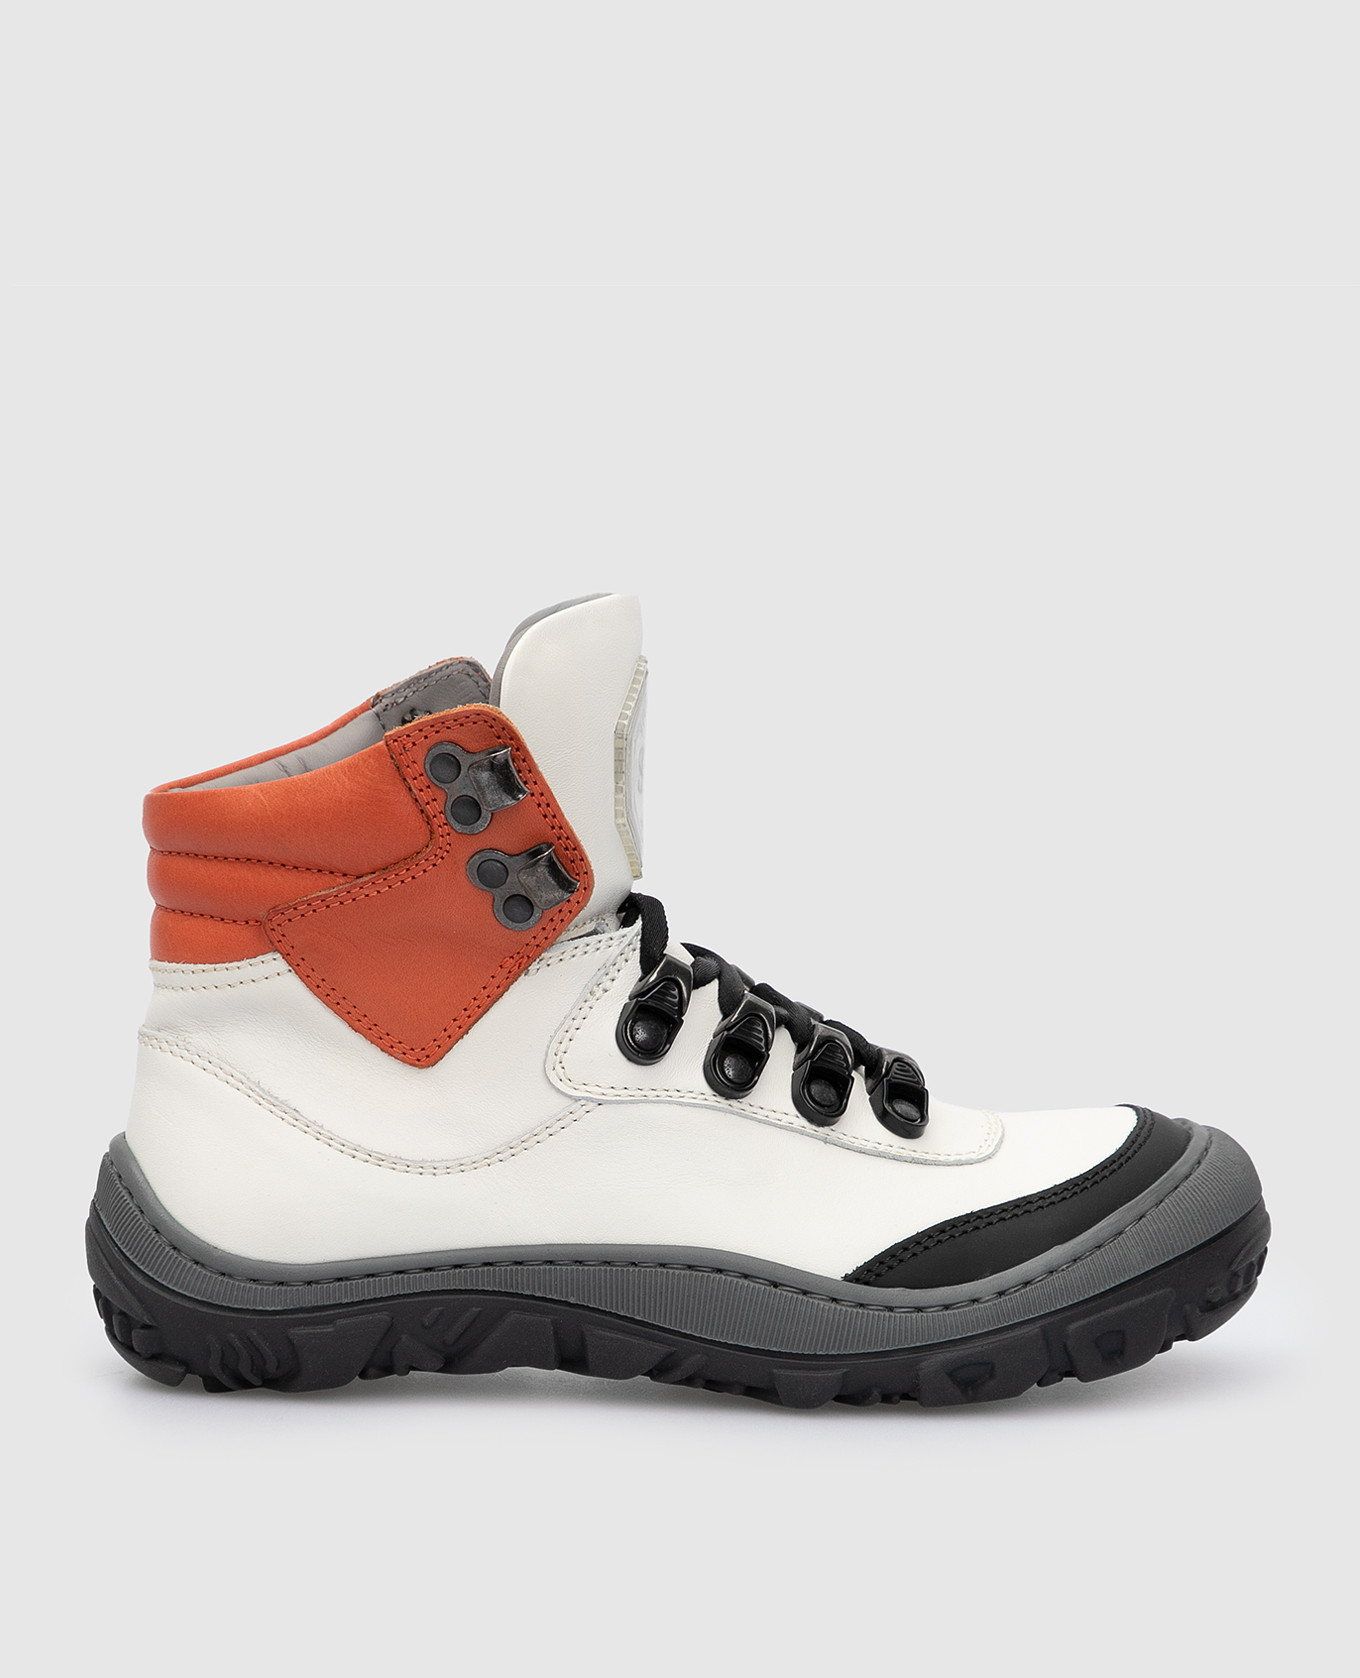 Children's white leather boots